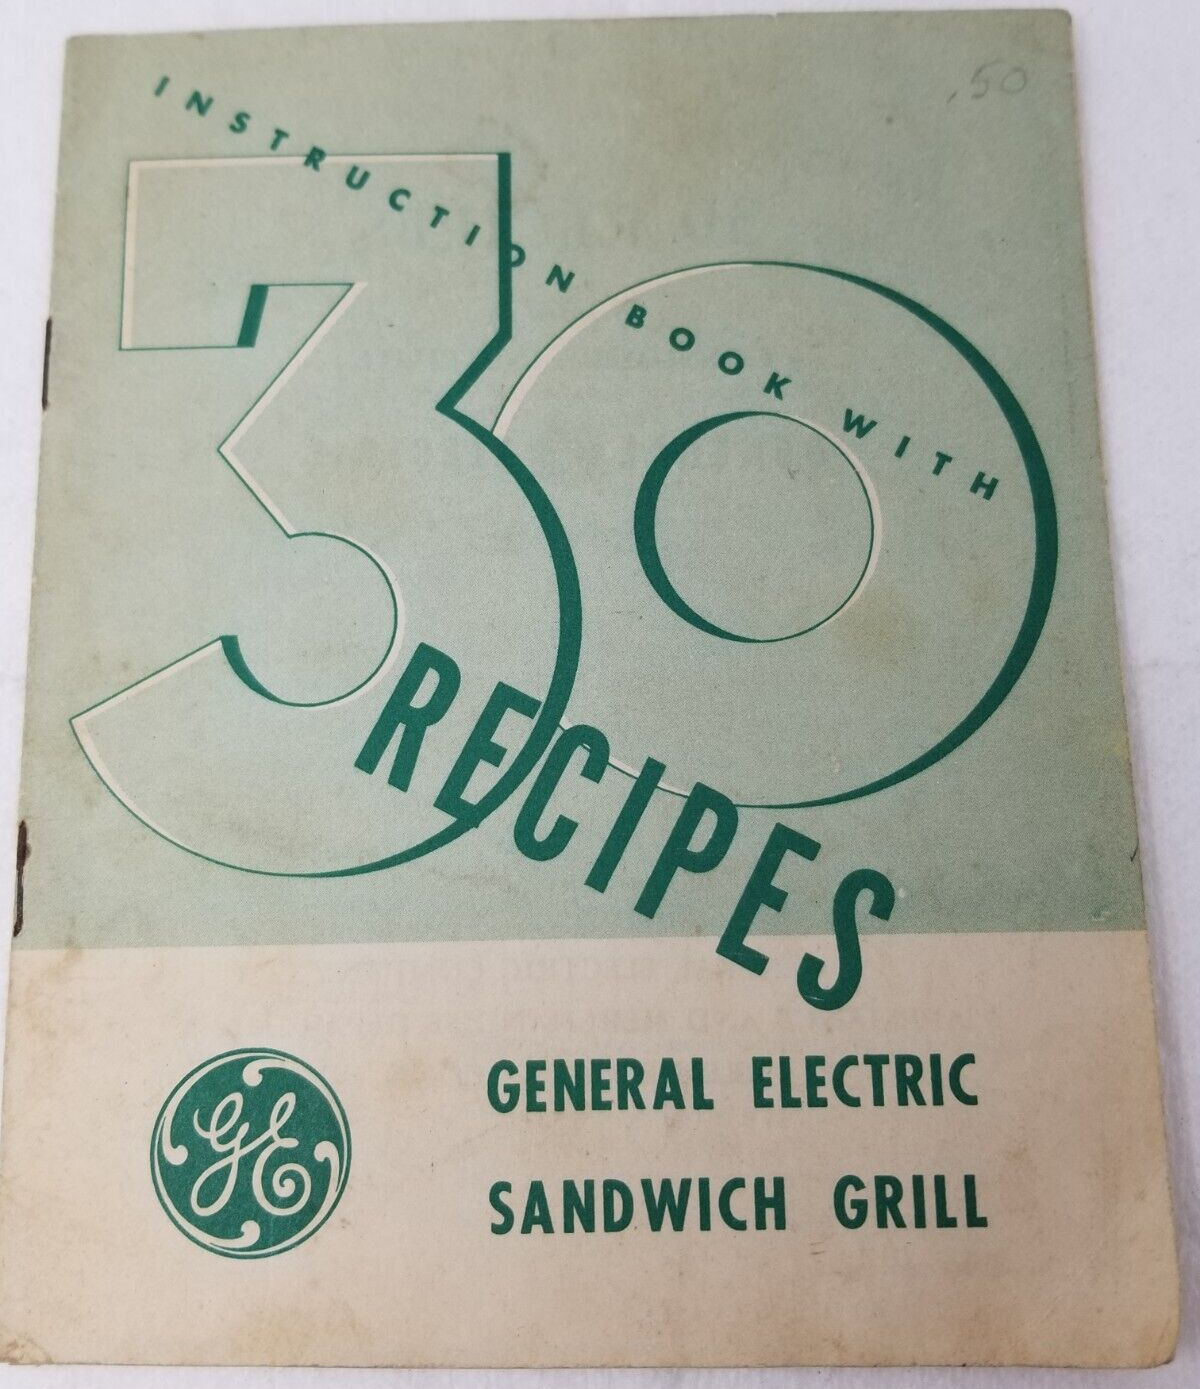 1949 GE General Electric Sandwich Grill Instruction Book with 30 Recipes